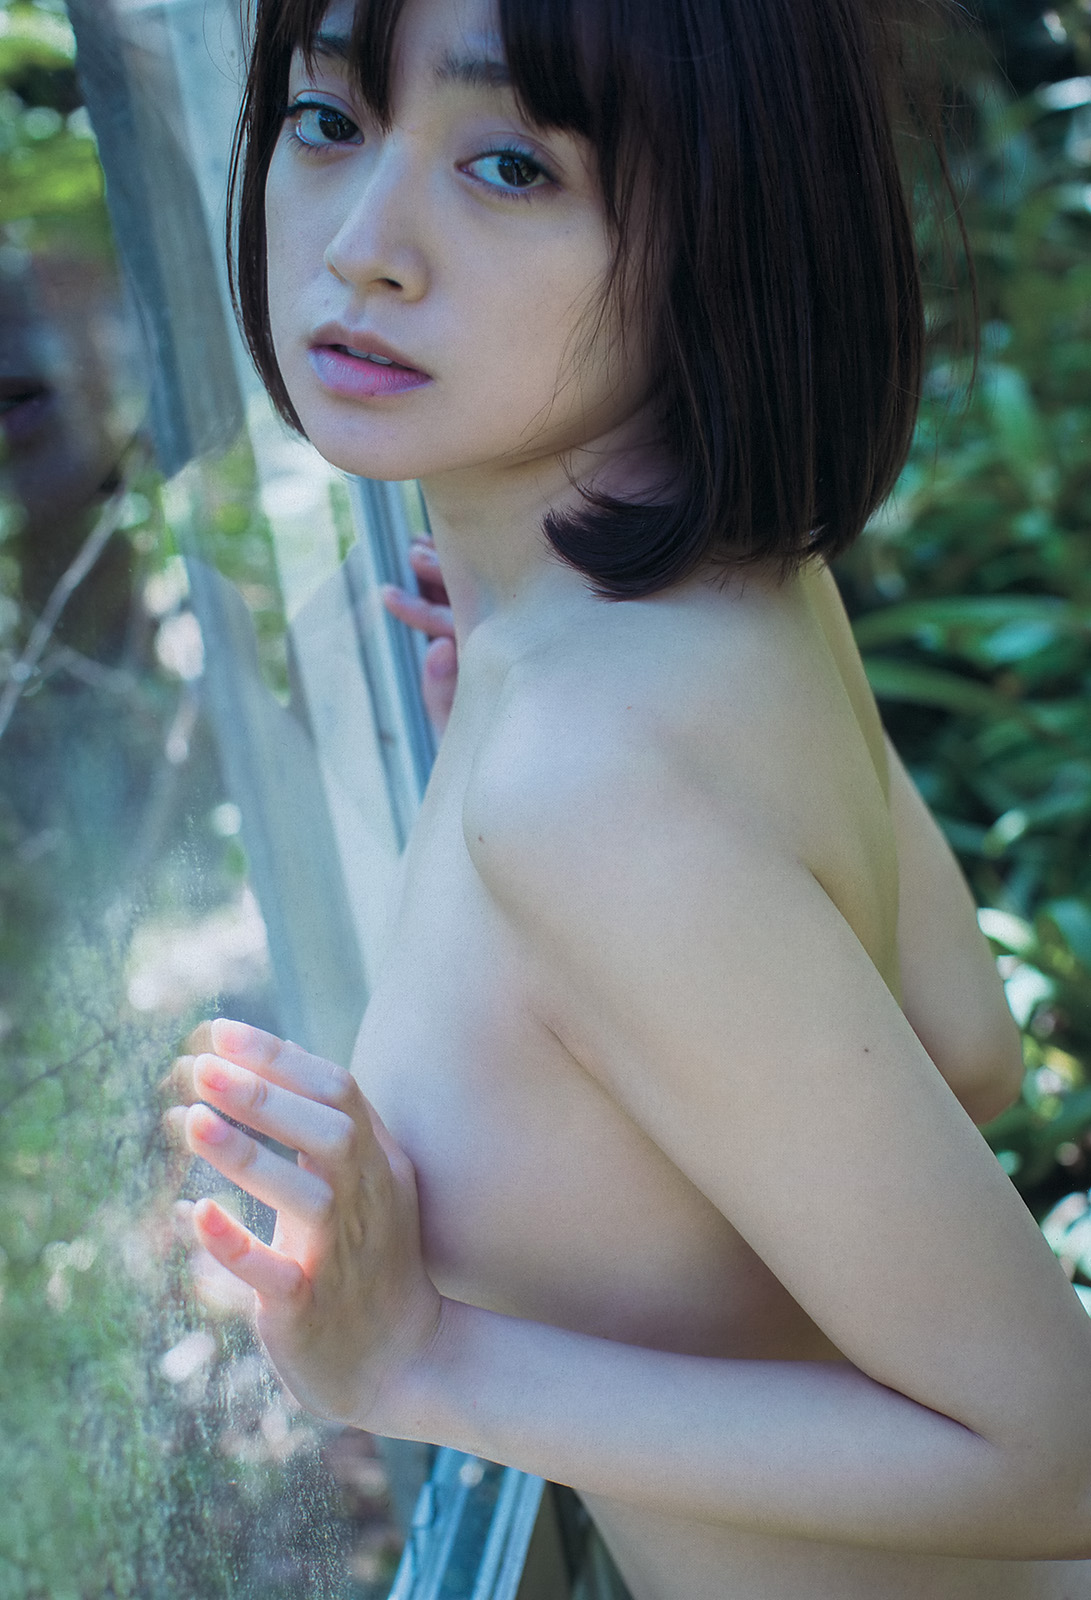 Yumi Adachi Nude Pictures. 